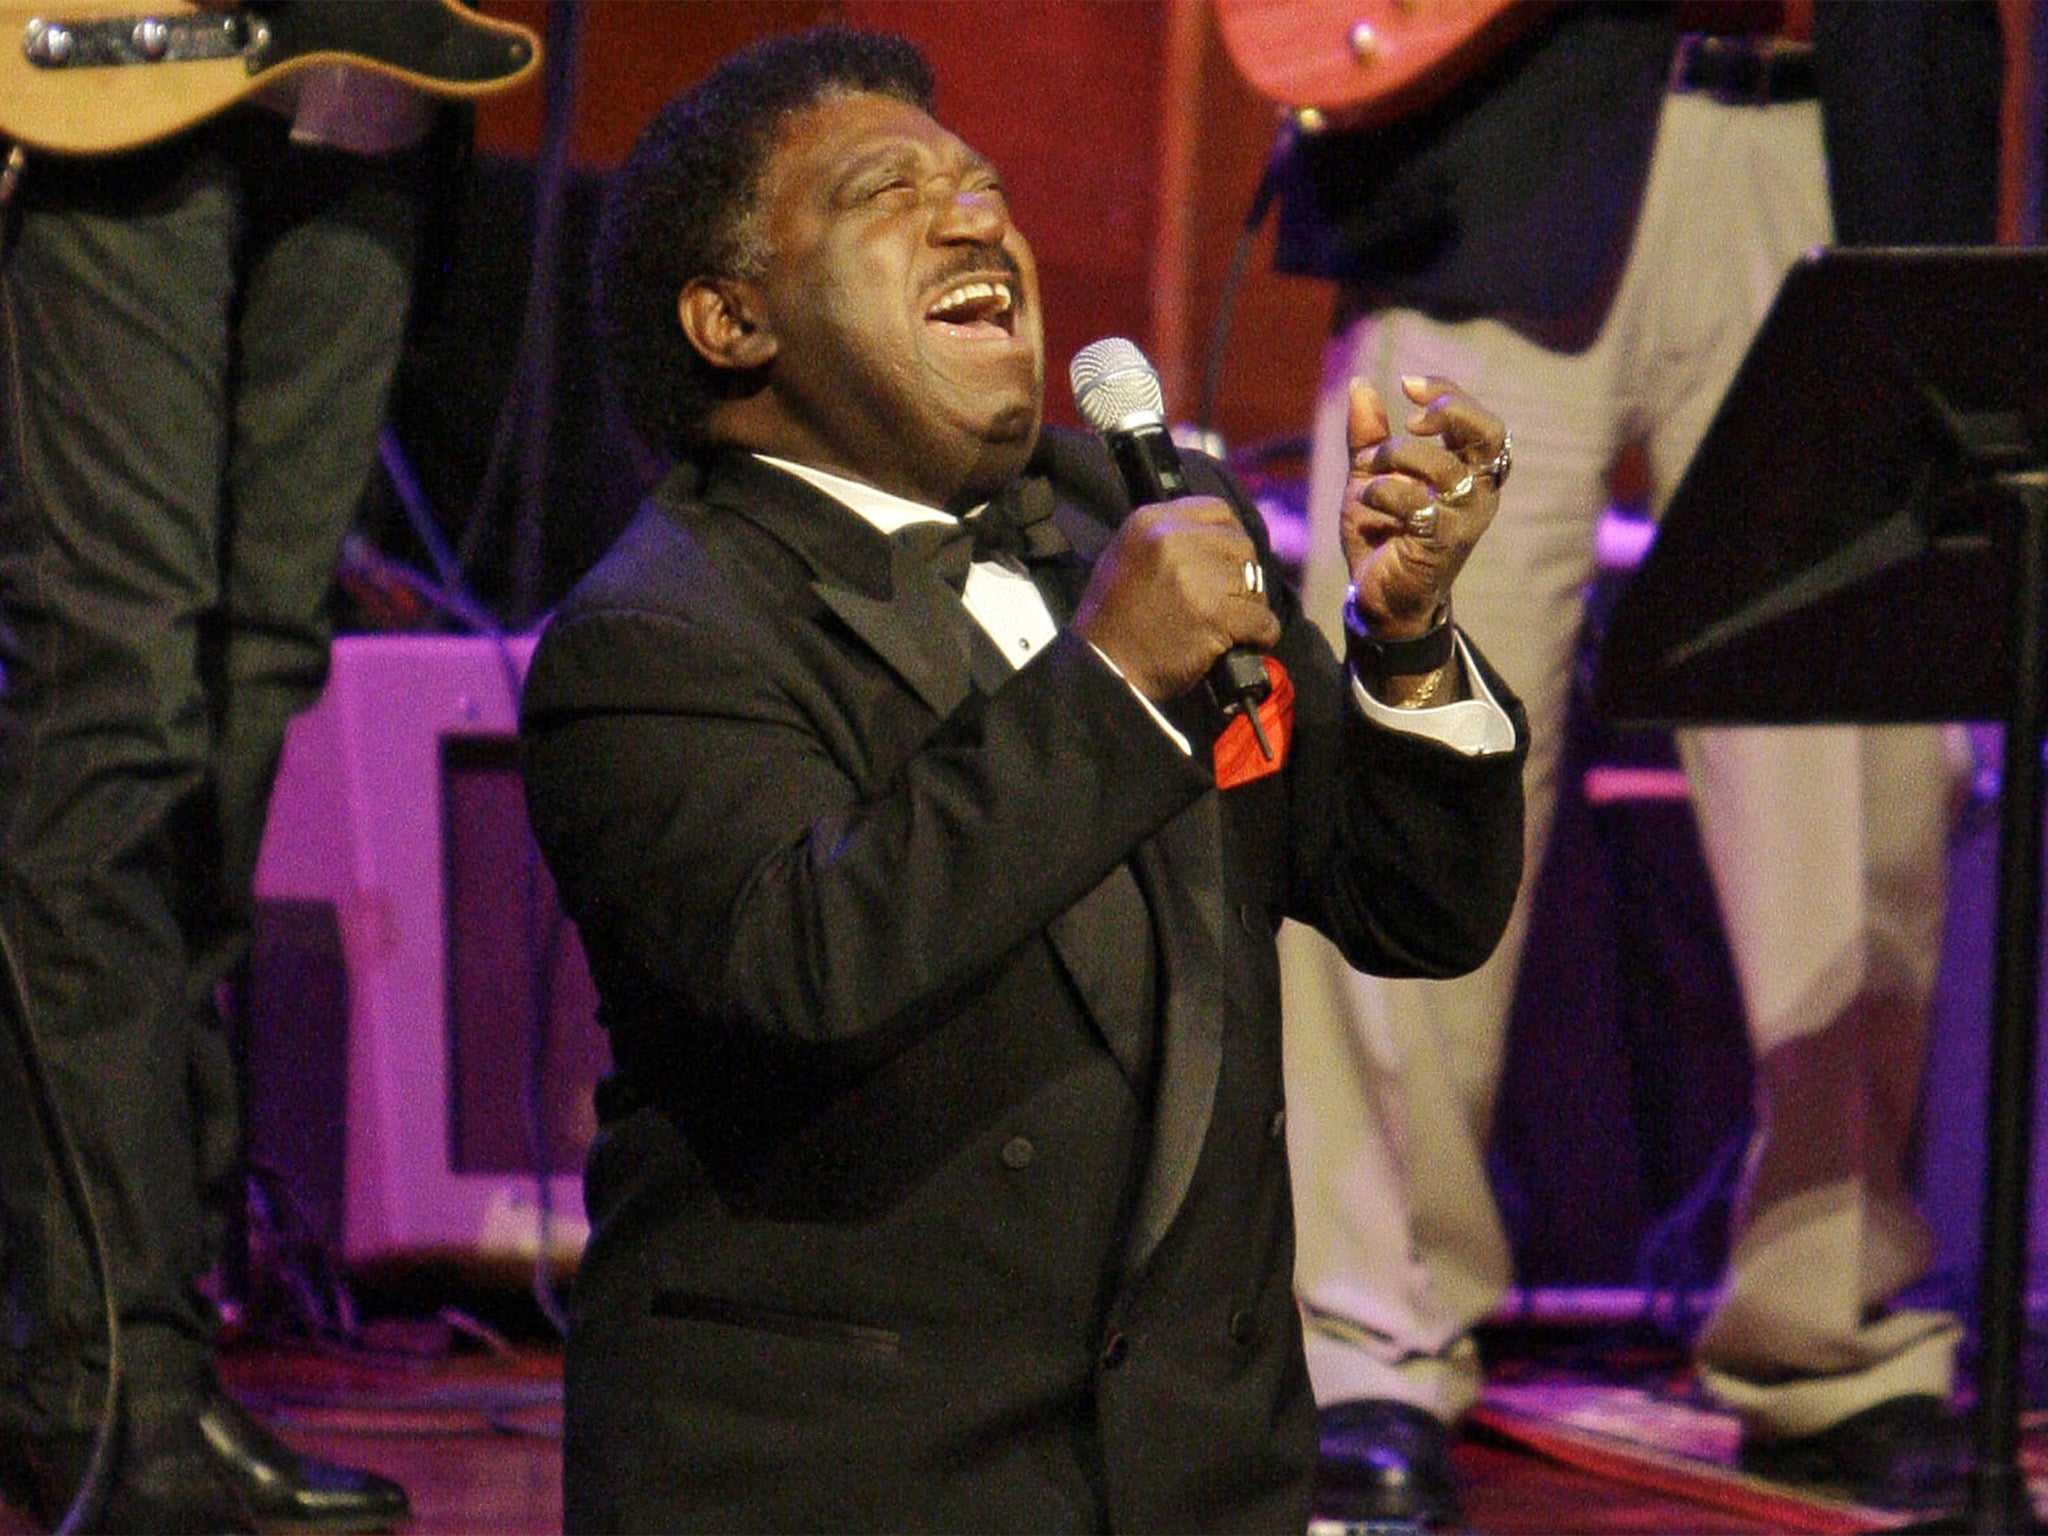 Sledge performs his signature song at the Musicians Hall of Fame Awards show in Nashville in 2008